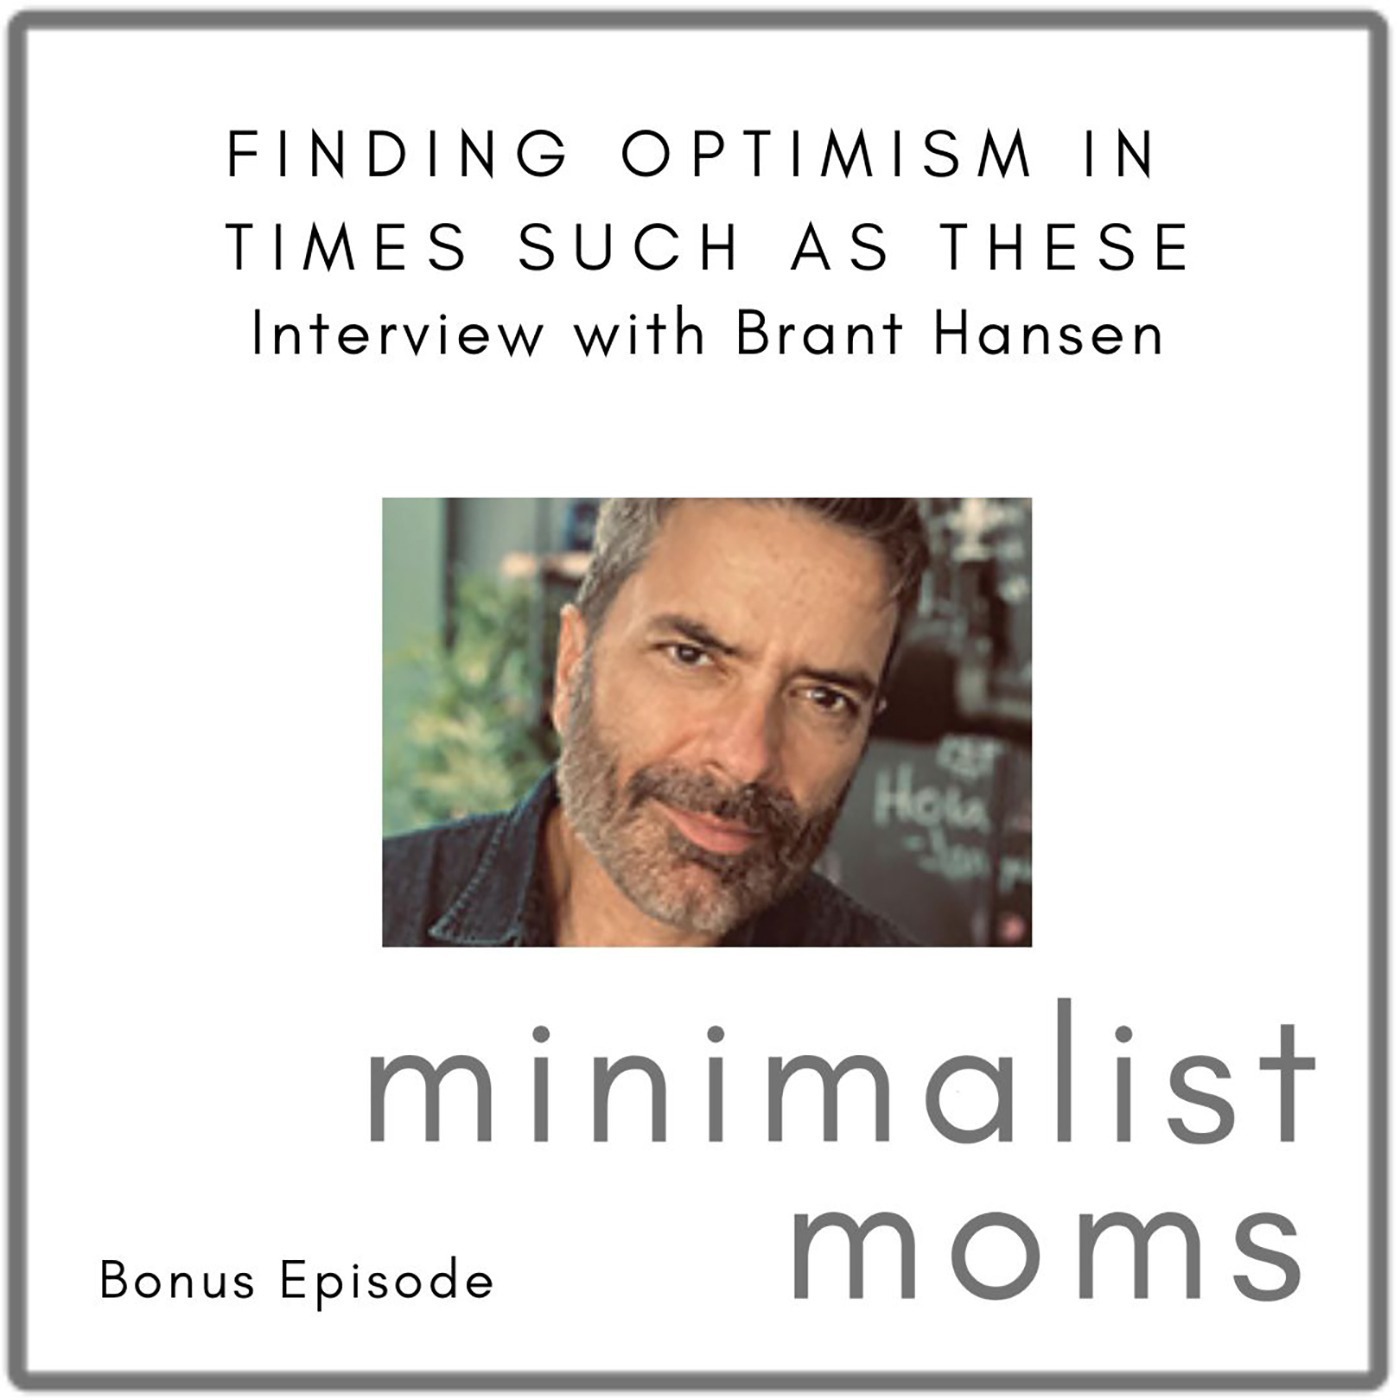 Finding Optimism in Times Such as These with Brant Hansen (Bonus Episode)